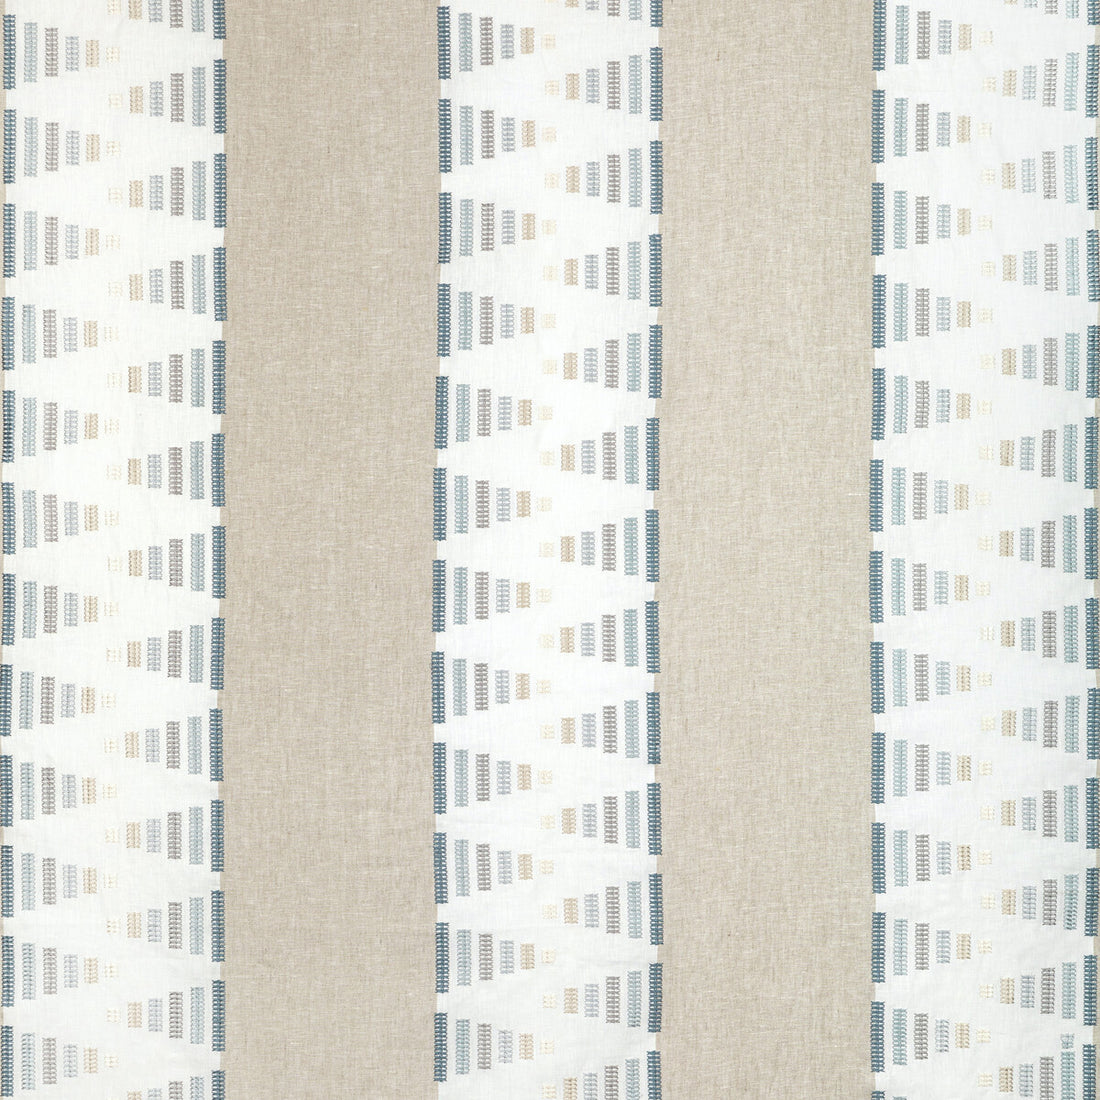 Joined Forces fabric in chambray color - pattern 36353.15.0 - by Kravet Couture in the Modern Luxe III collection